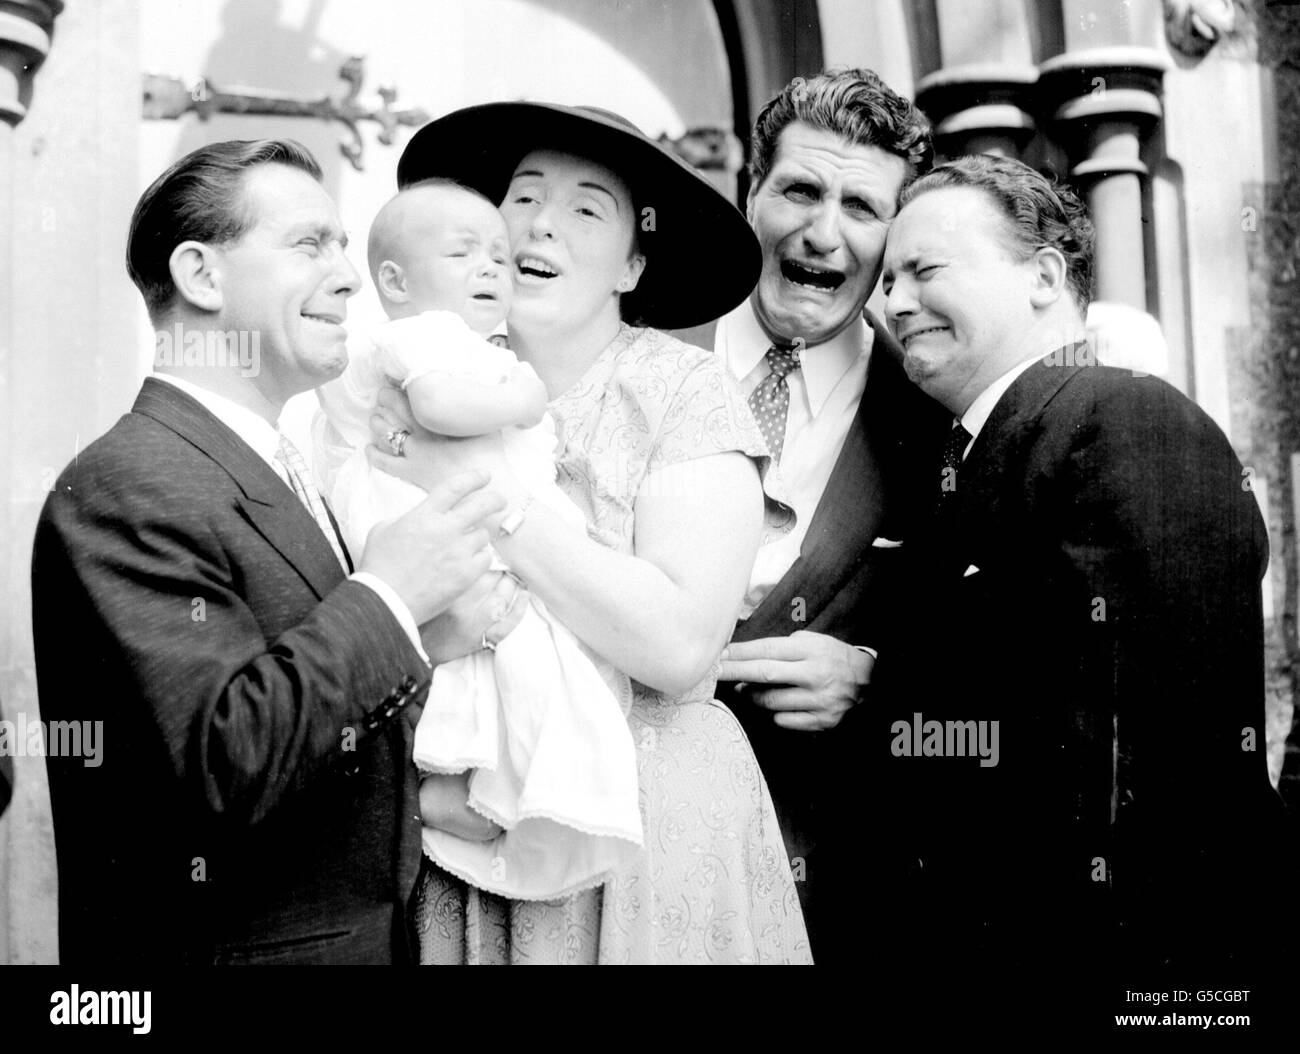 Tommy cooper Black and White Stock Photos & Images - Alamy